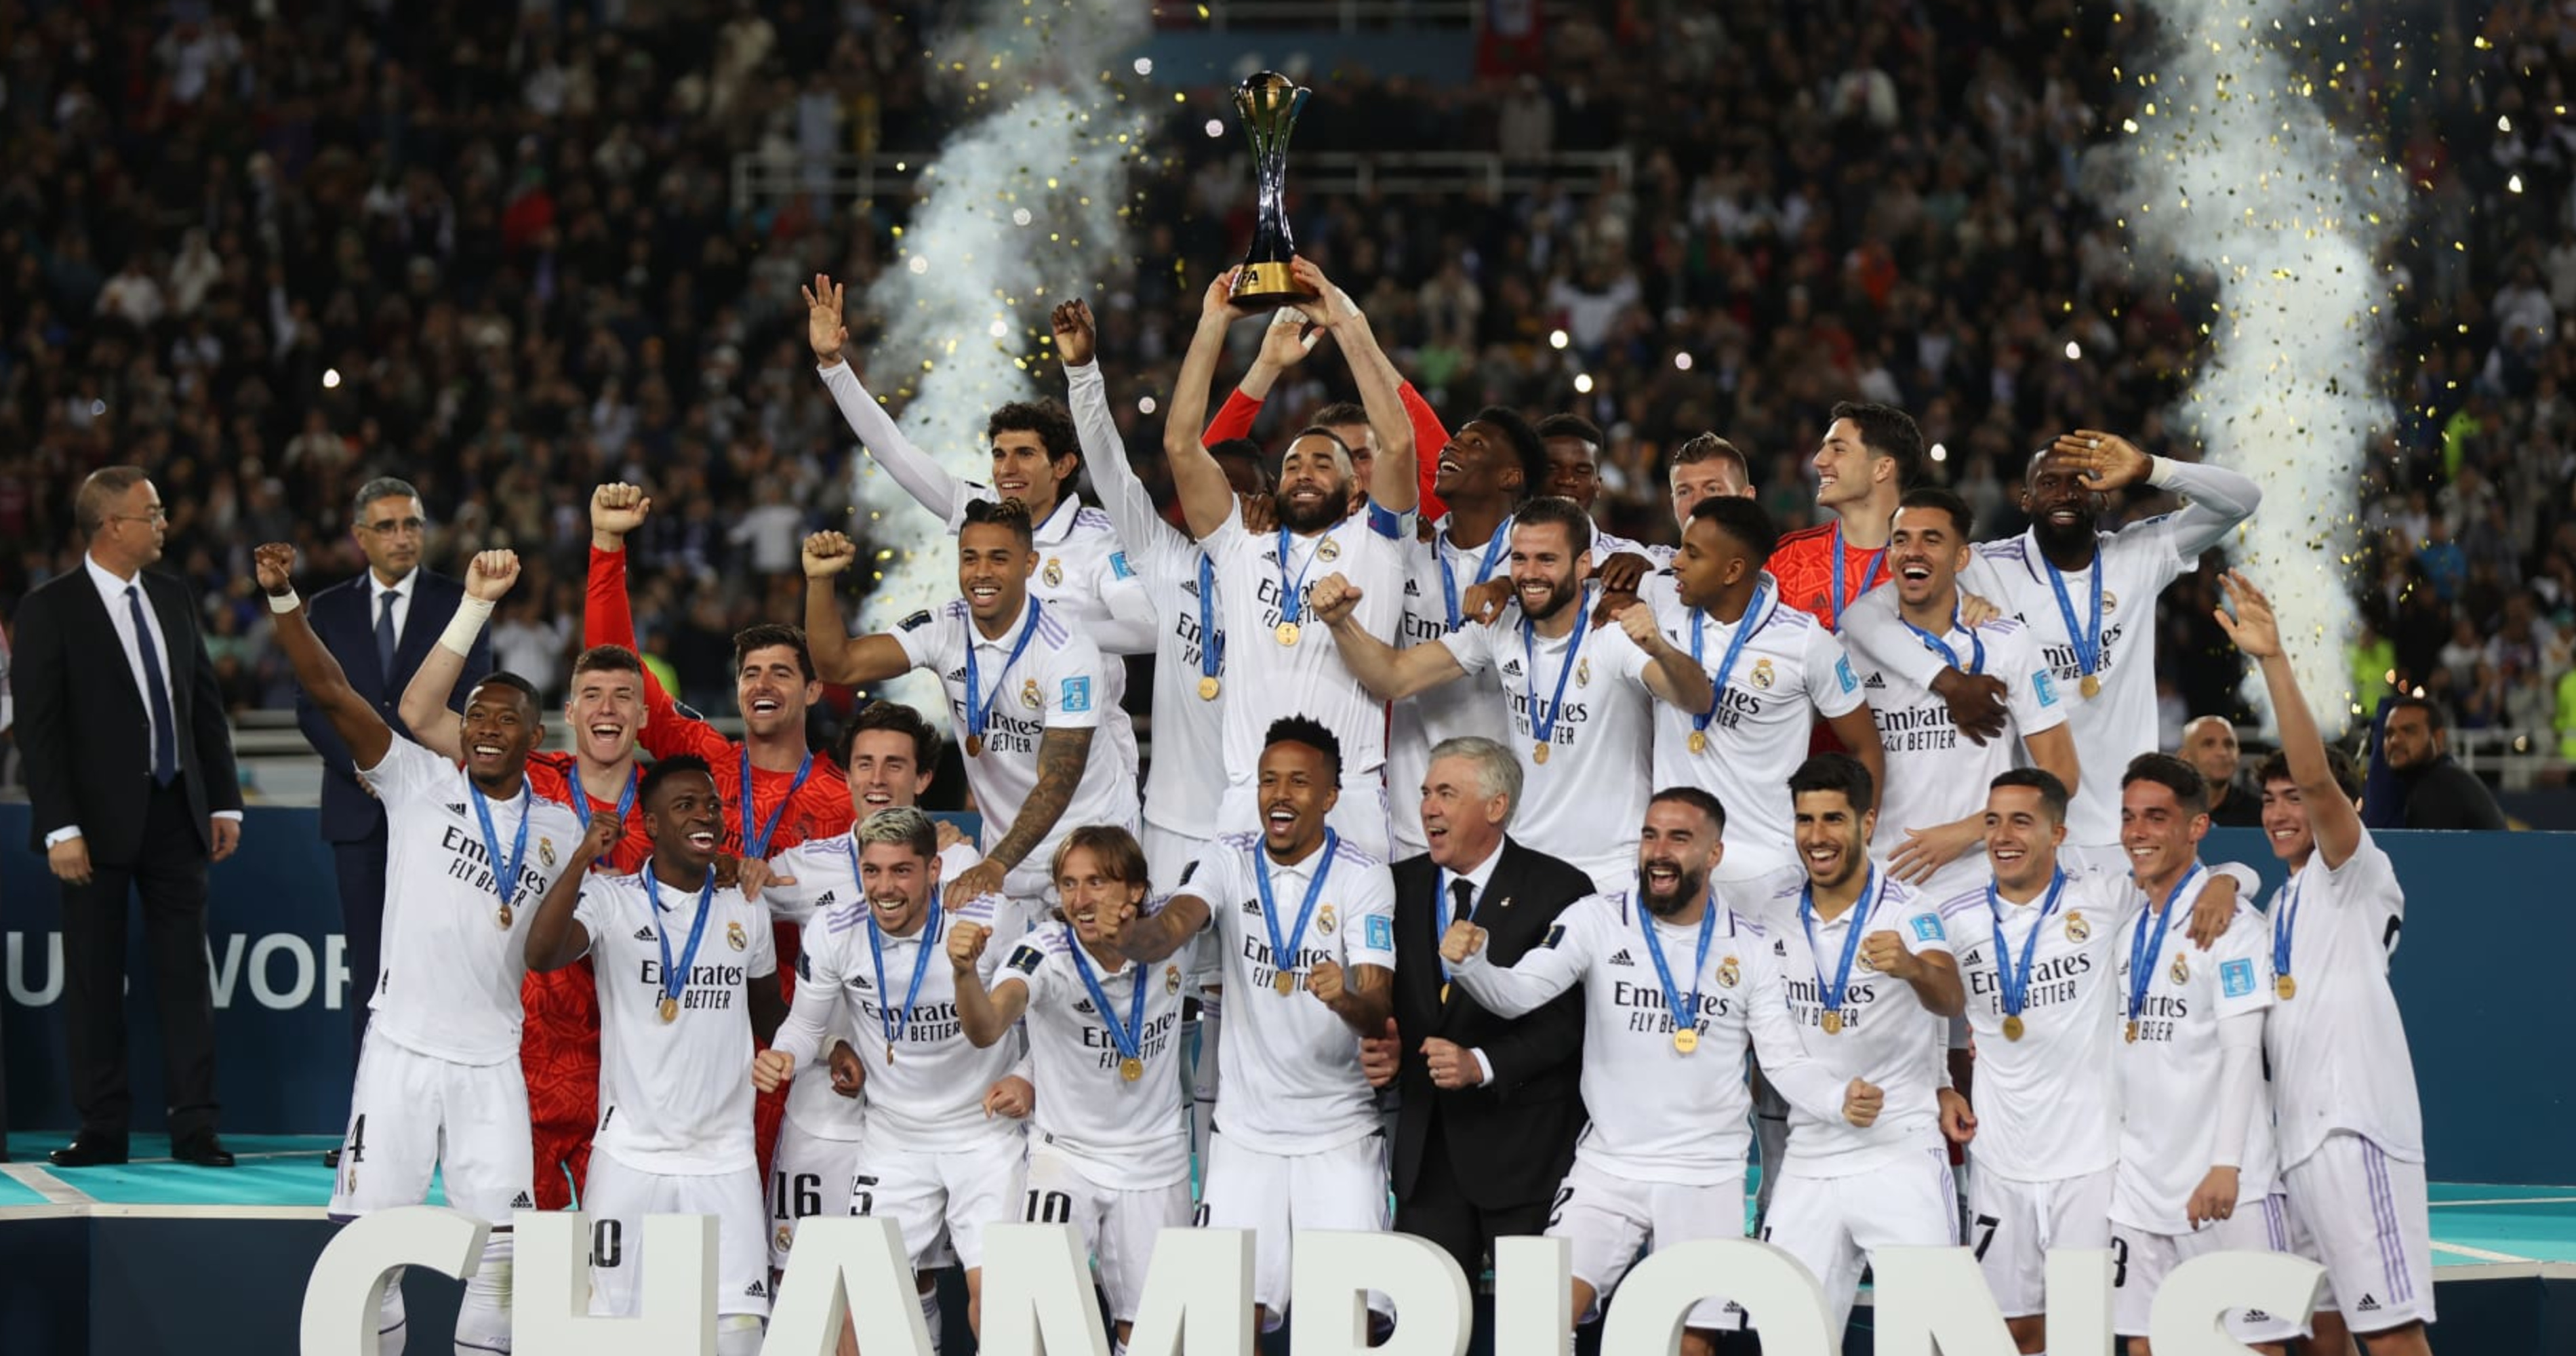 FIFA Club World Cup Preview - Managing Madrid